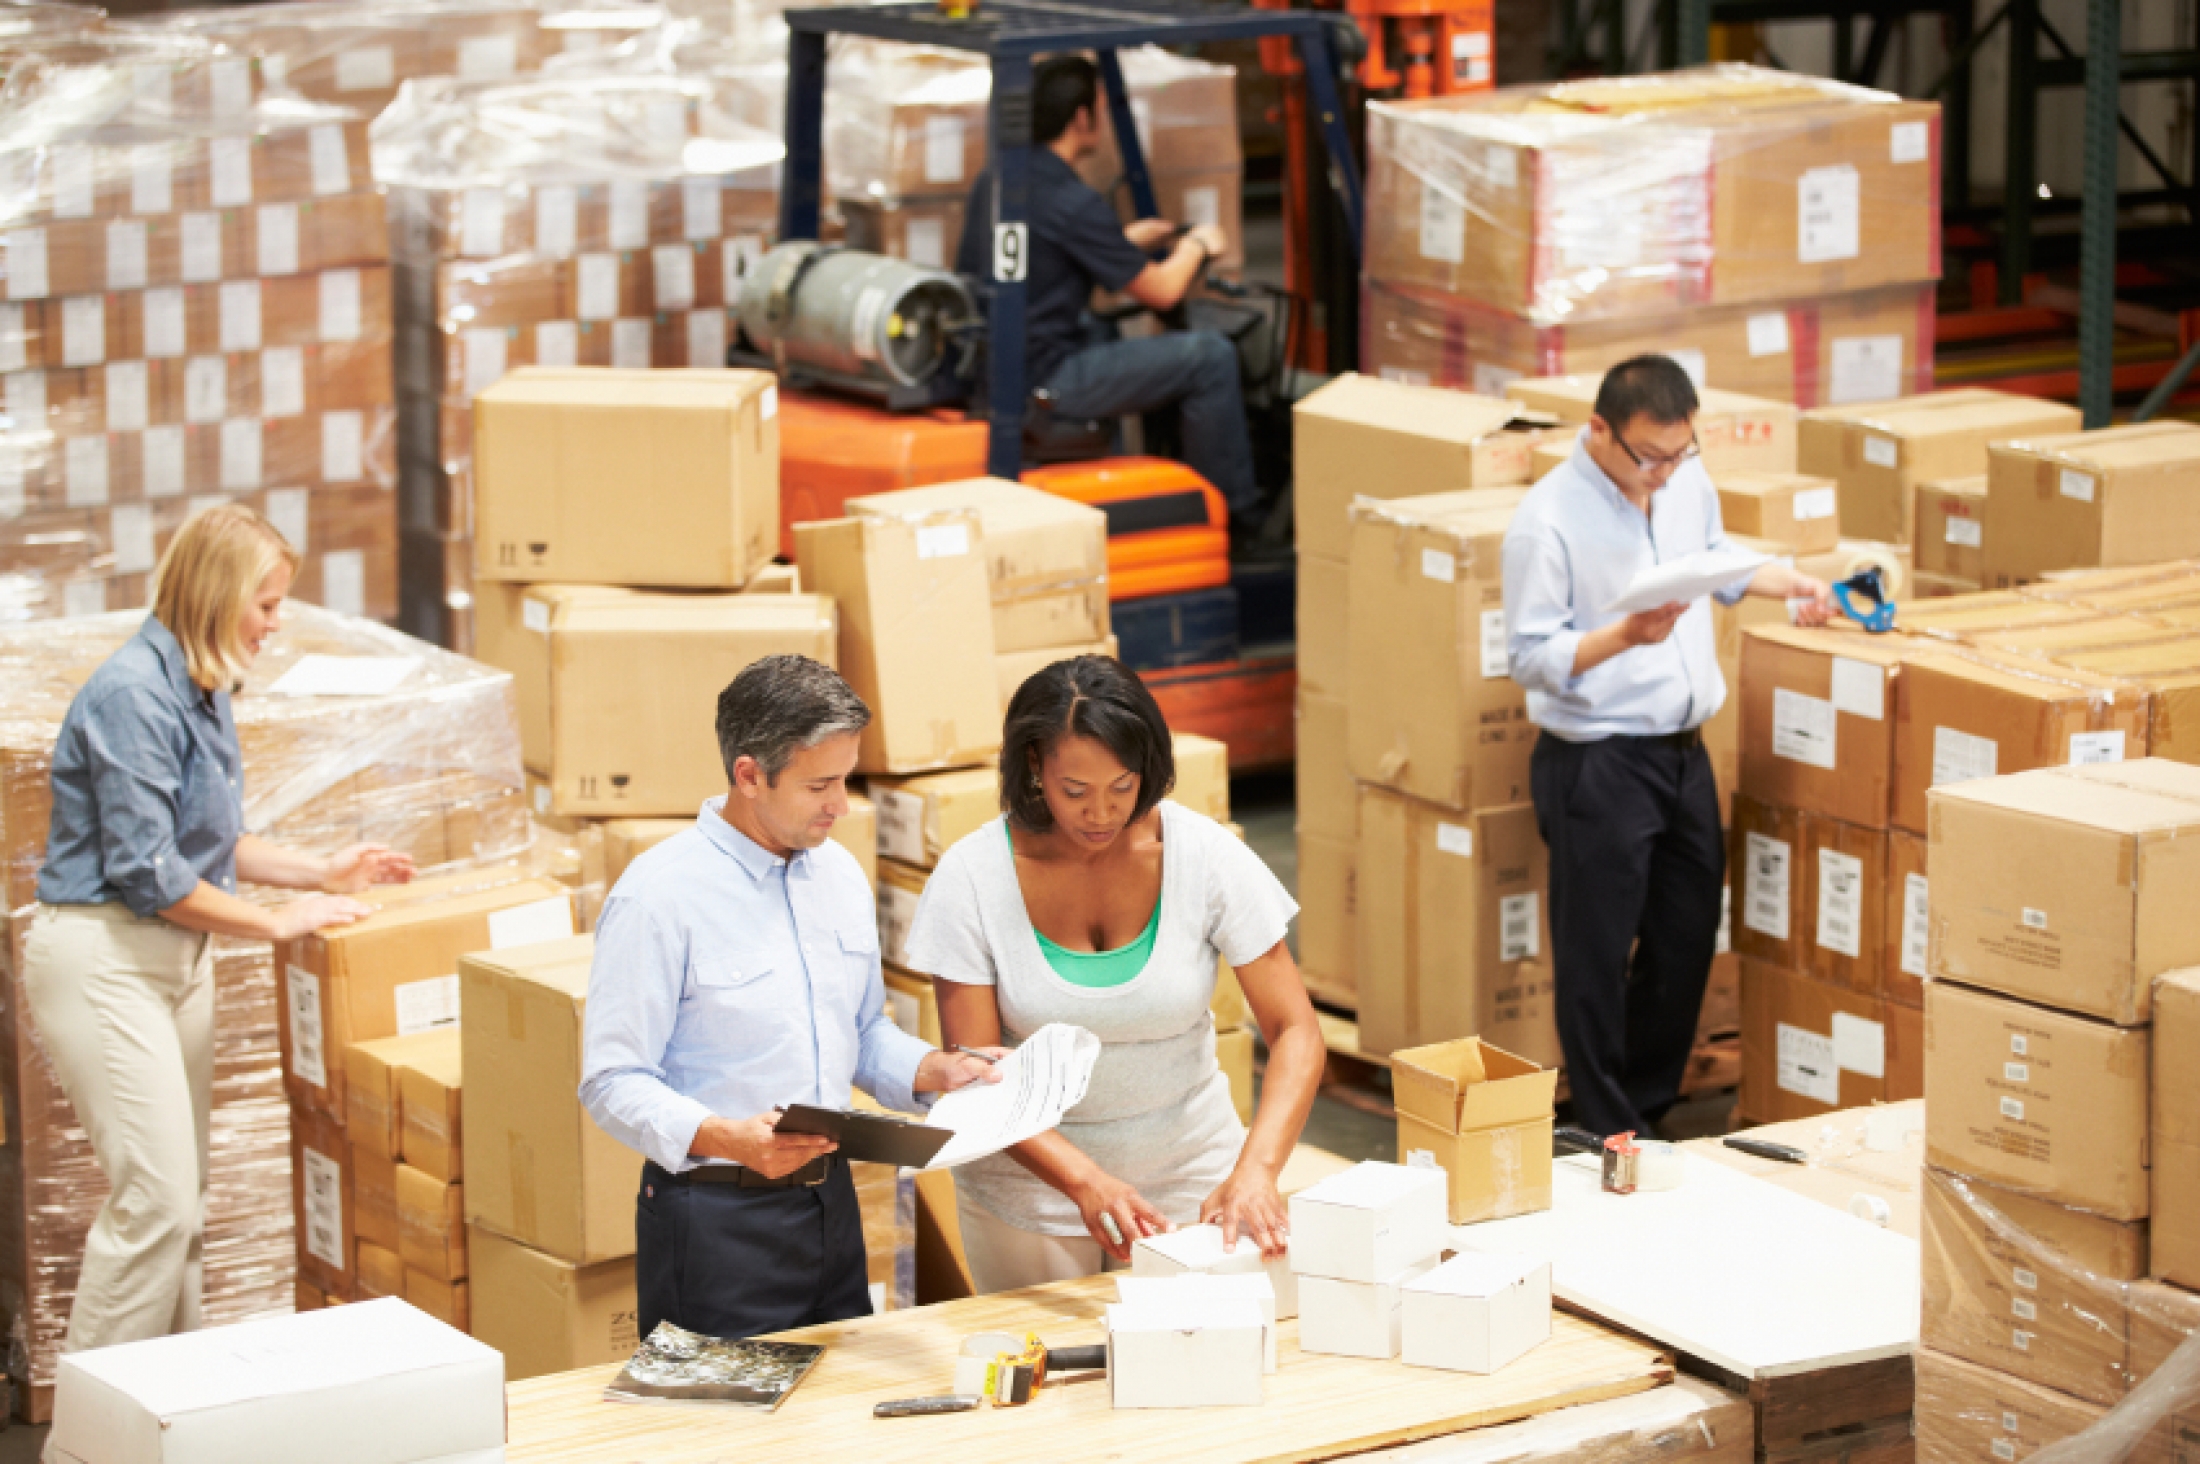 A logistics consultant from CIM GmbH visits a customer’s warehouse (symbolic image)